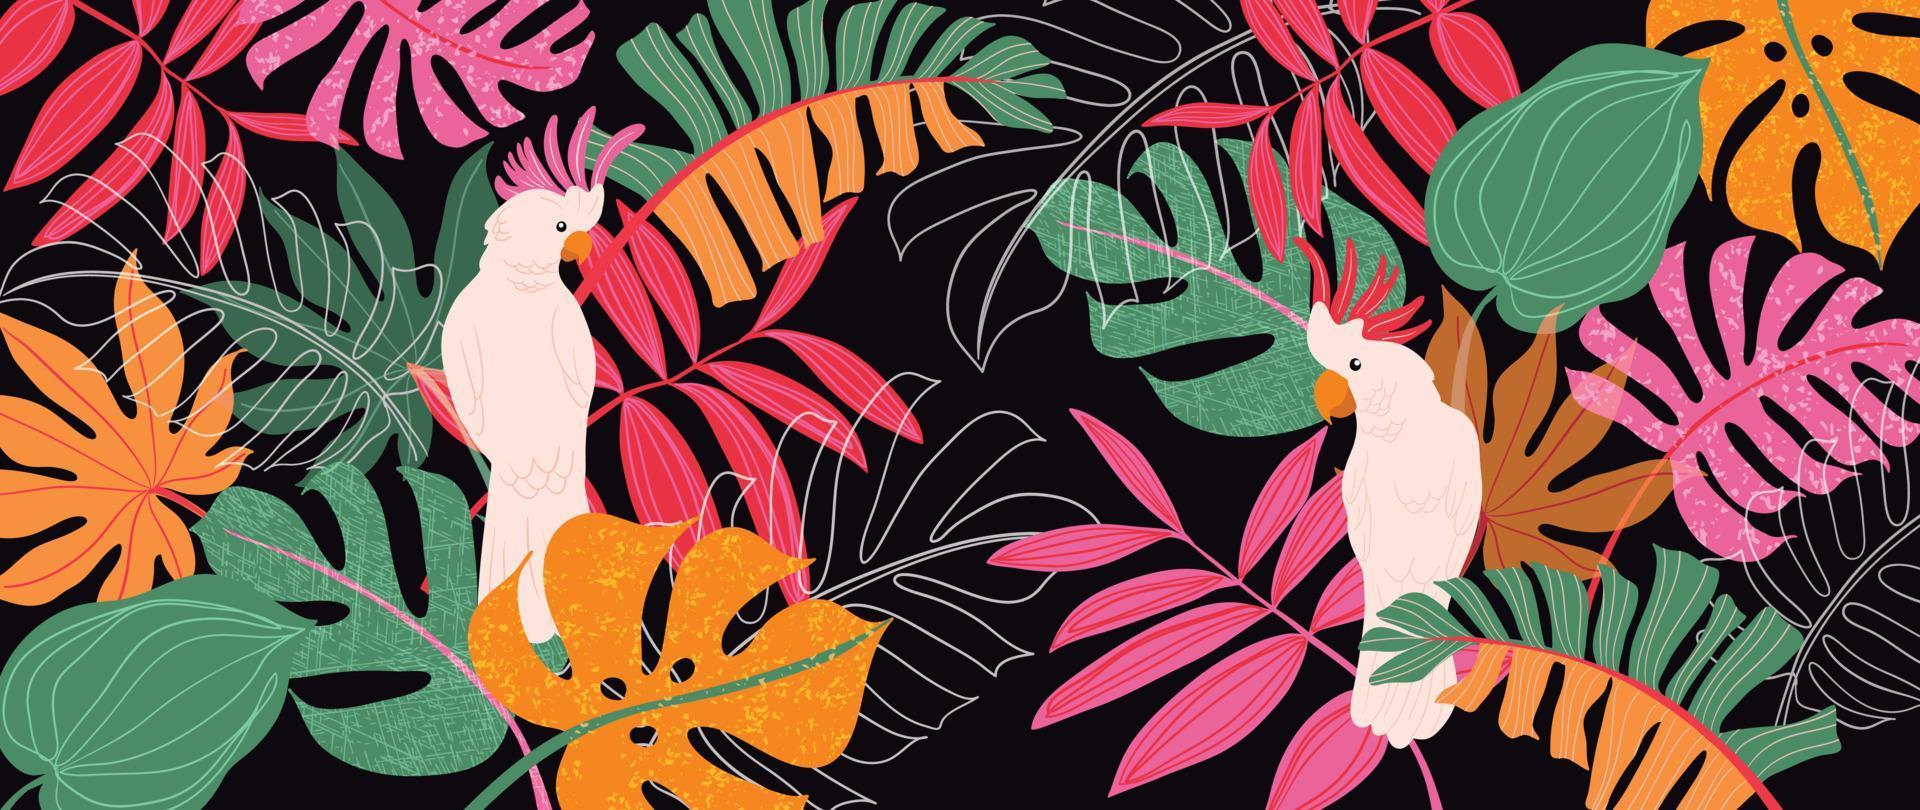 Colorful tropical background vector illustration. Jungle monstera palm leaves, exotic summer style line art and grunge texture with cockatoo bird. Contemporary design for home decoration, wallpaper.